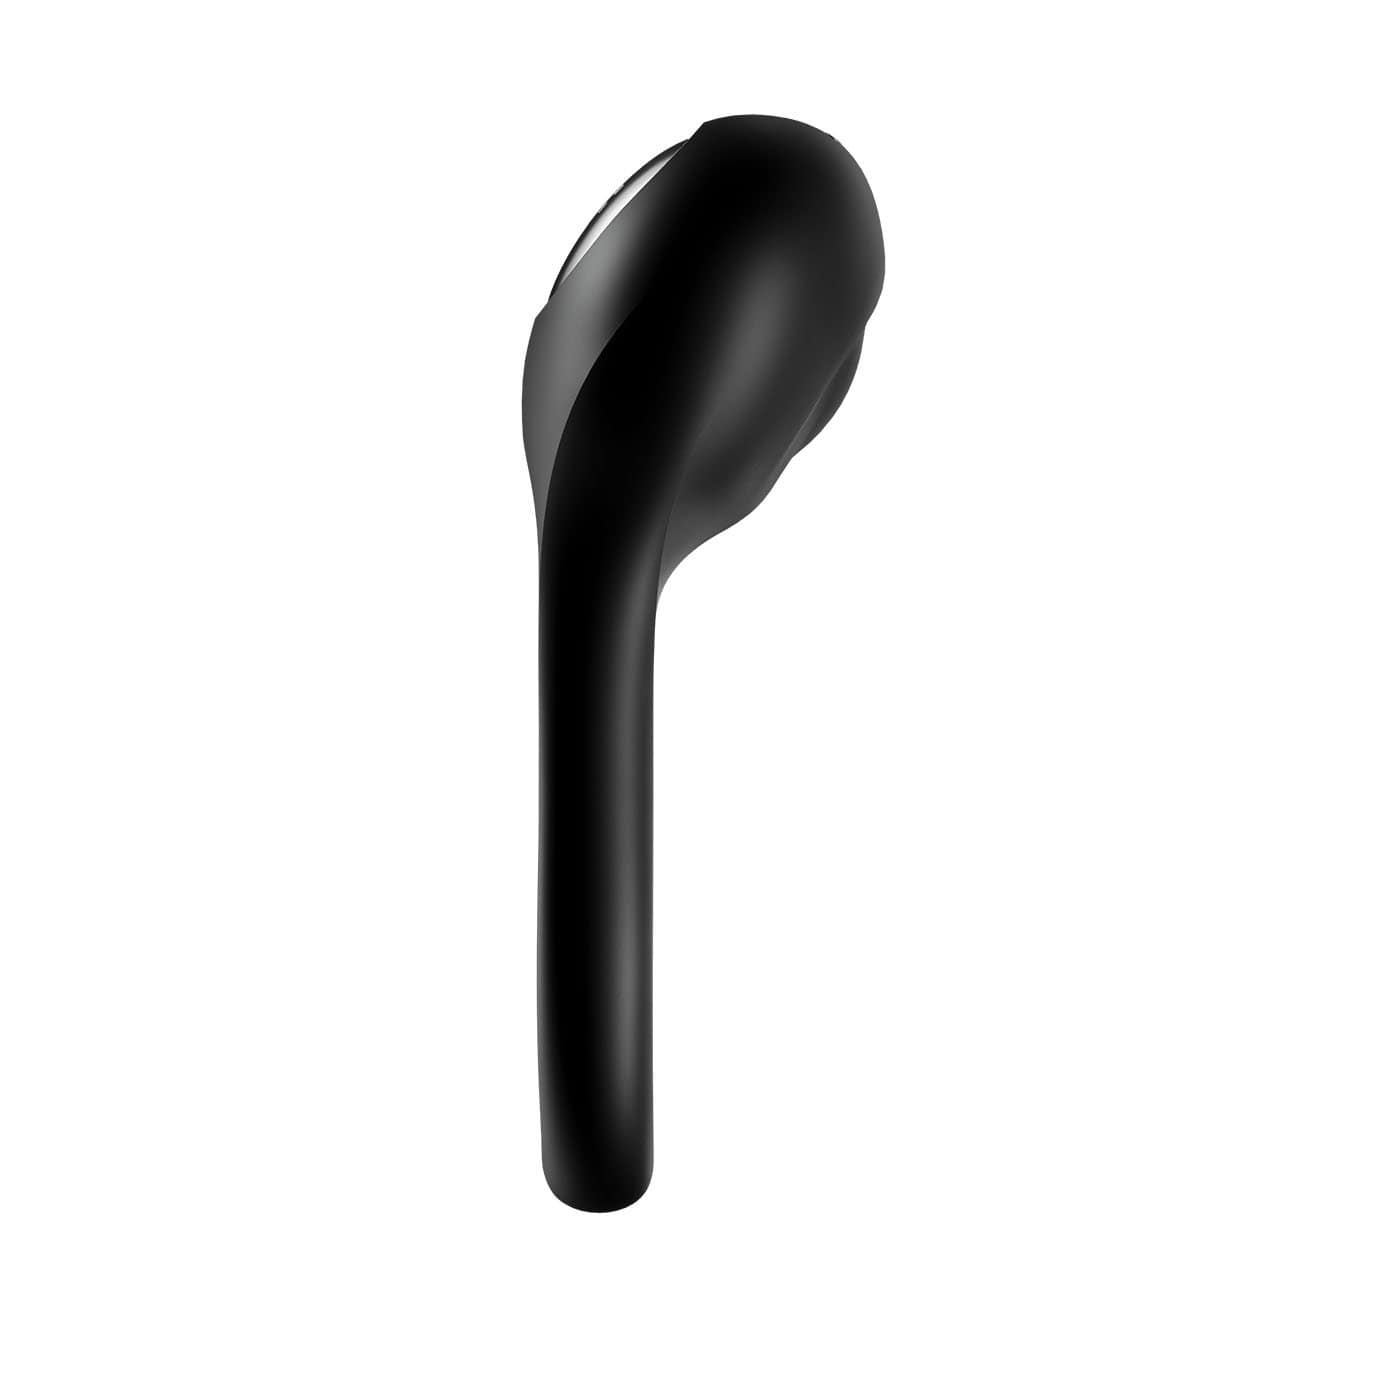 Satisfyer - Majestic Duo Silicone Vibrating Cock Ring (Black) Silicone Cock Ring (Vibration) Rechargeable 4061504009957 CherryAffairs